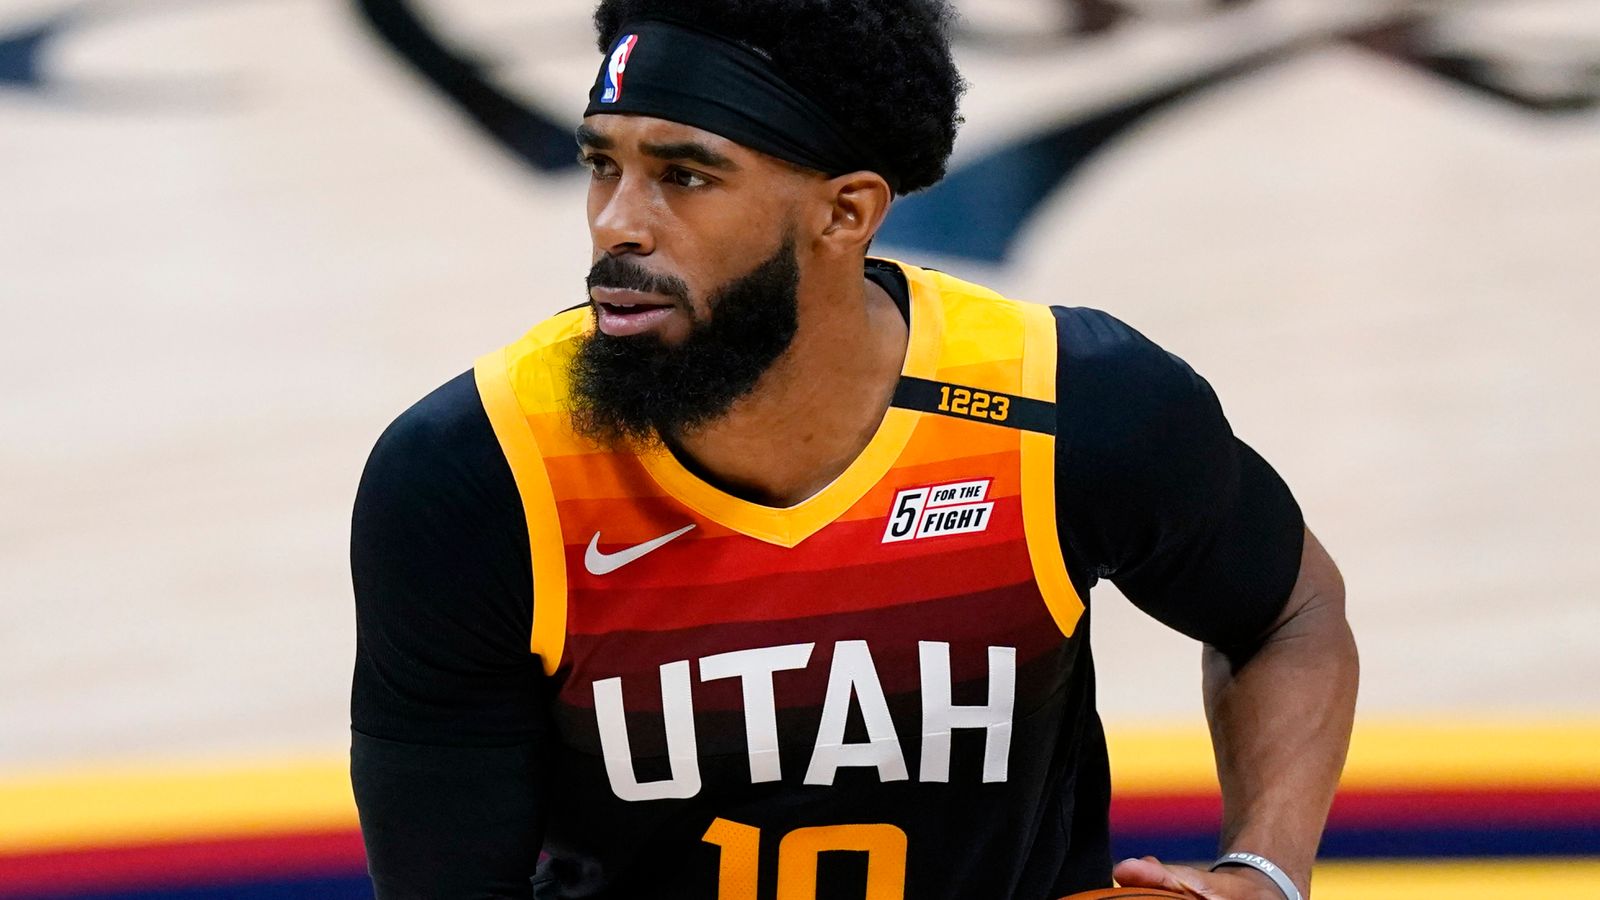 Jazz guard Mike Conley named All-Star replacement for Devin Booker